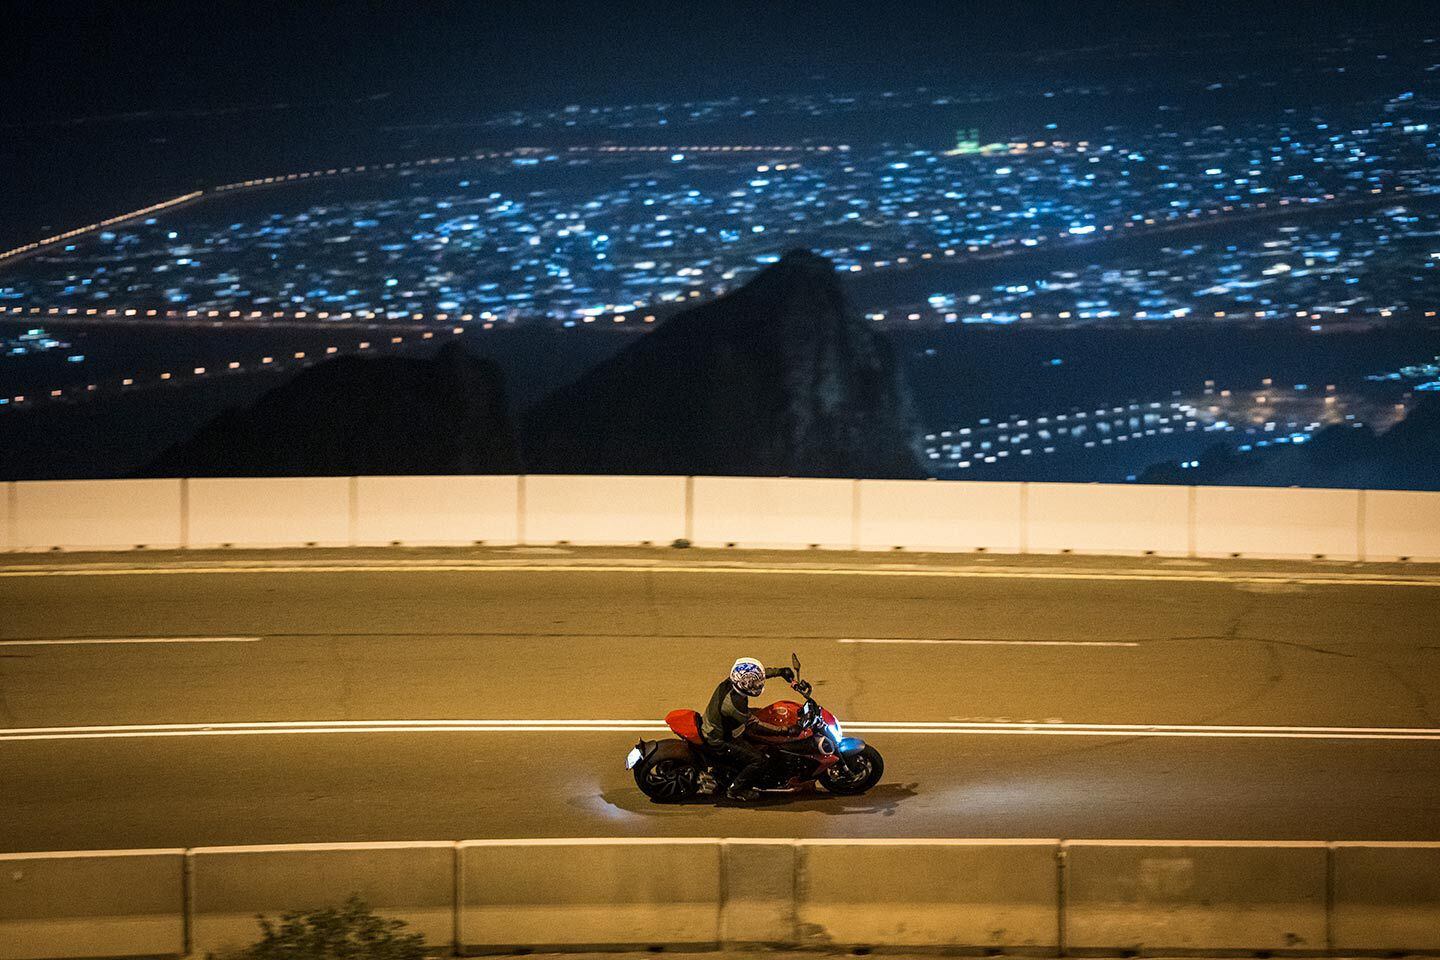 The launch was conducted at Jebel Hafeet, Abu Dhabi (UAE), riding both day and night.